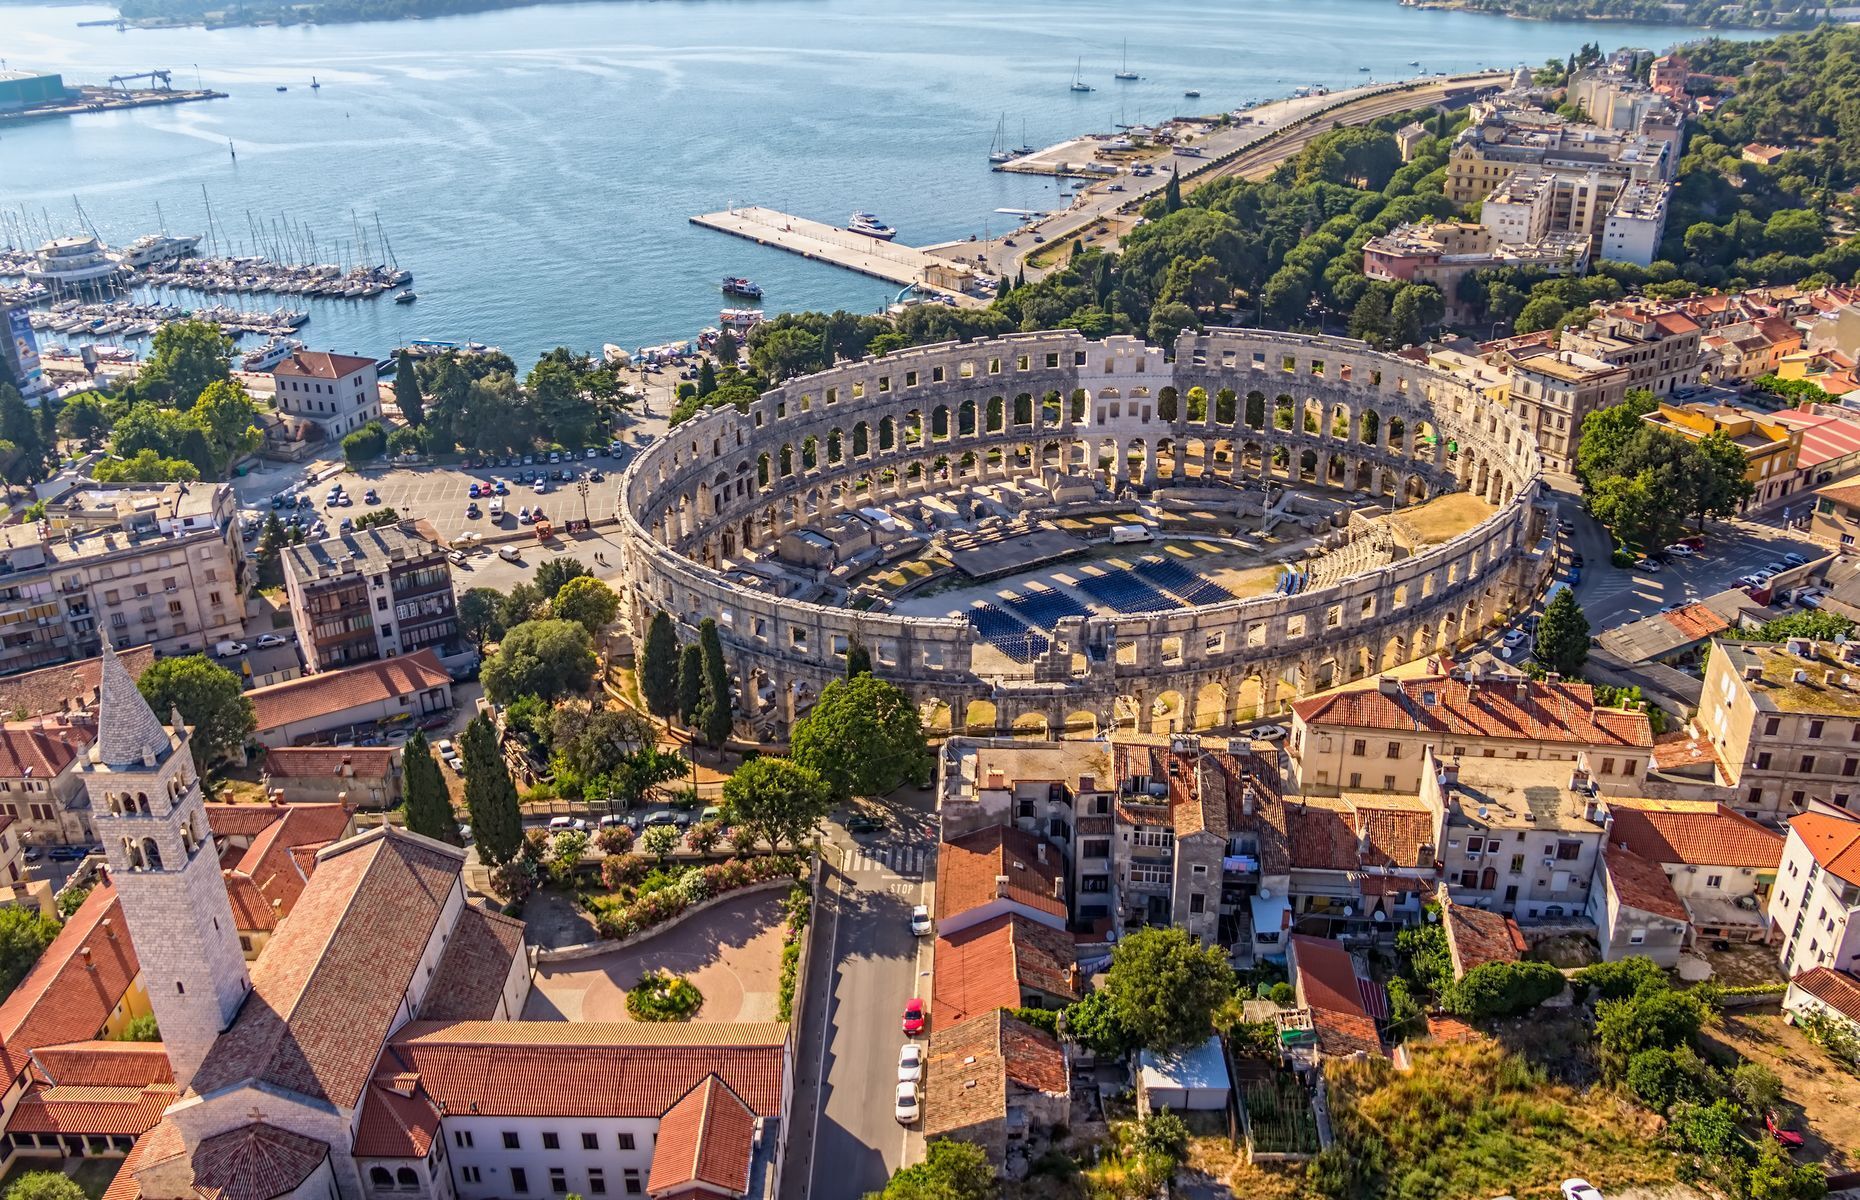 If Rome is on your bucket list, <a href="https://visitpula.croatia.hr/en-gb" rel="noreferrer noopener">Pula</a> is a great alternative and much more affordable than the Italian capital! Its amphitheatre will not only remind you of the famous Colosseum, but you’ll also definitely feel a Roman influence in the city’s history and archaeological treasures. This magnificent seaside resort also boasts sublime beaches, such as Valkane and Verudela, where you can relax and soak up the sun.